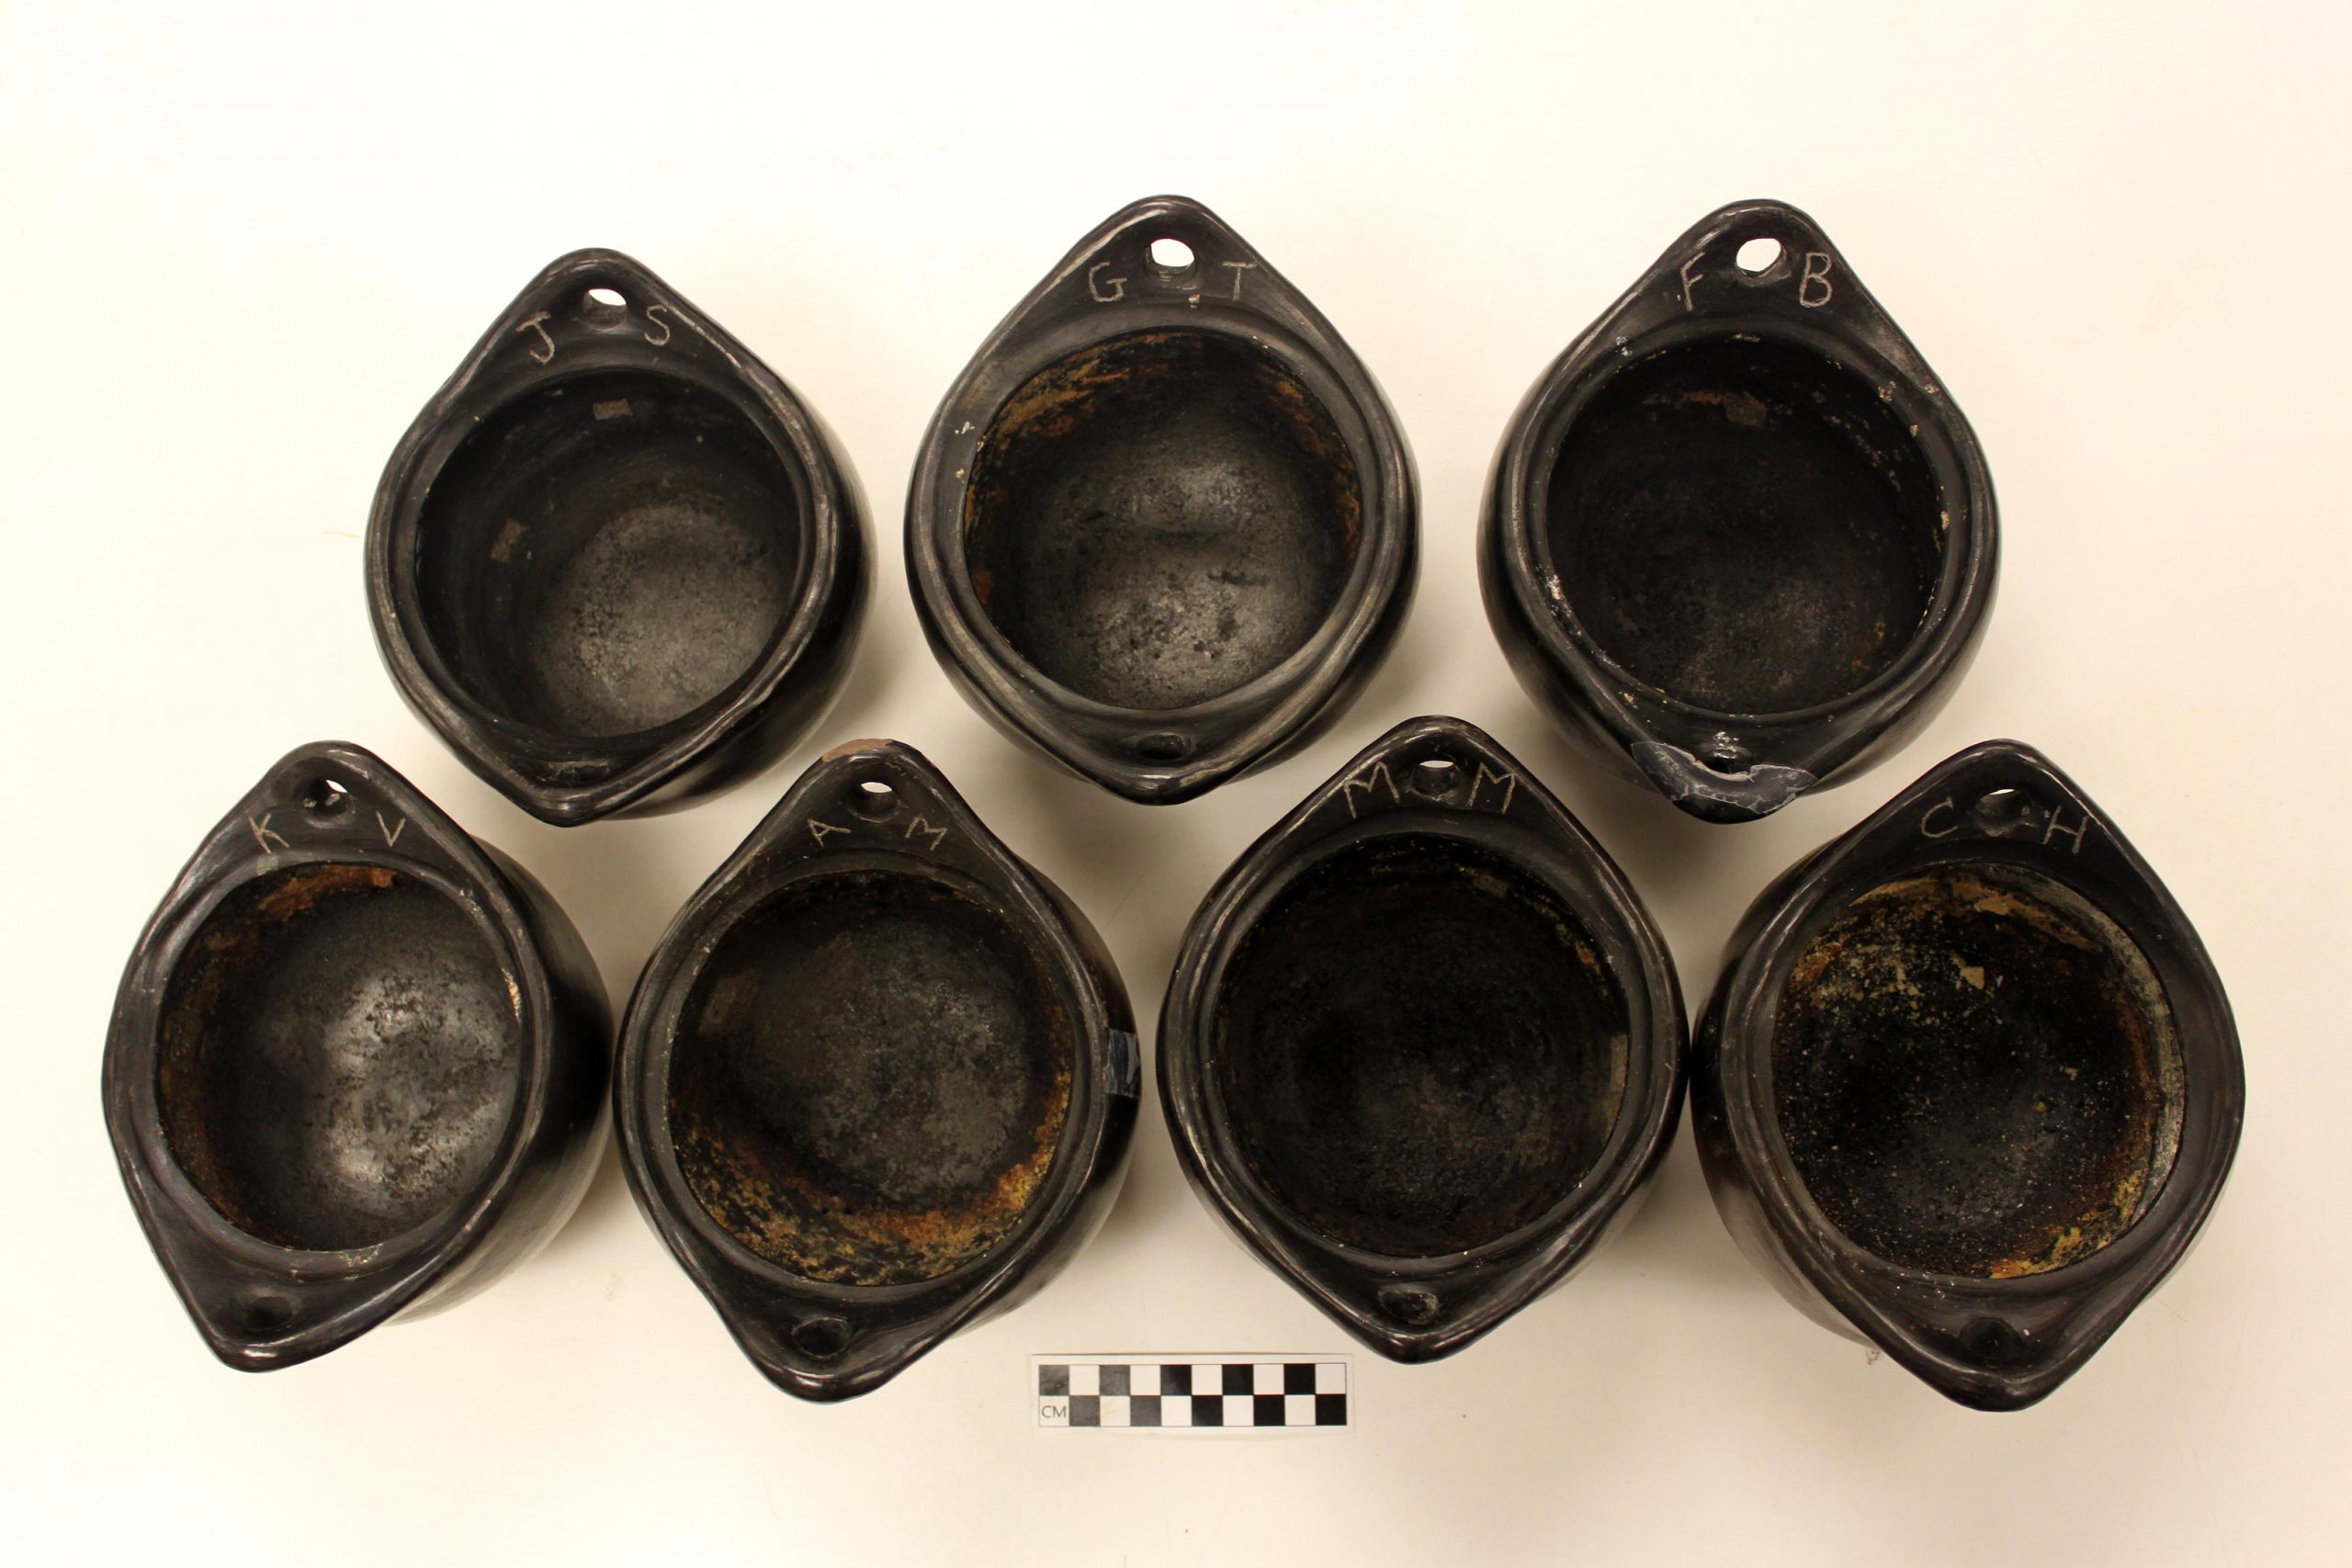 Reconstructing the Meals That People Consumed in the Past From Chemical Residues on Ancient Cooking Pots - SciTechDaily